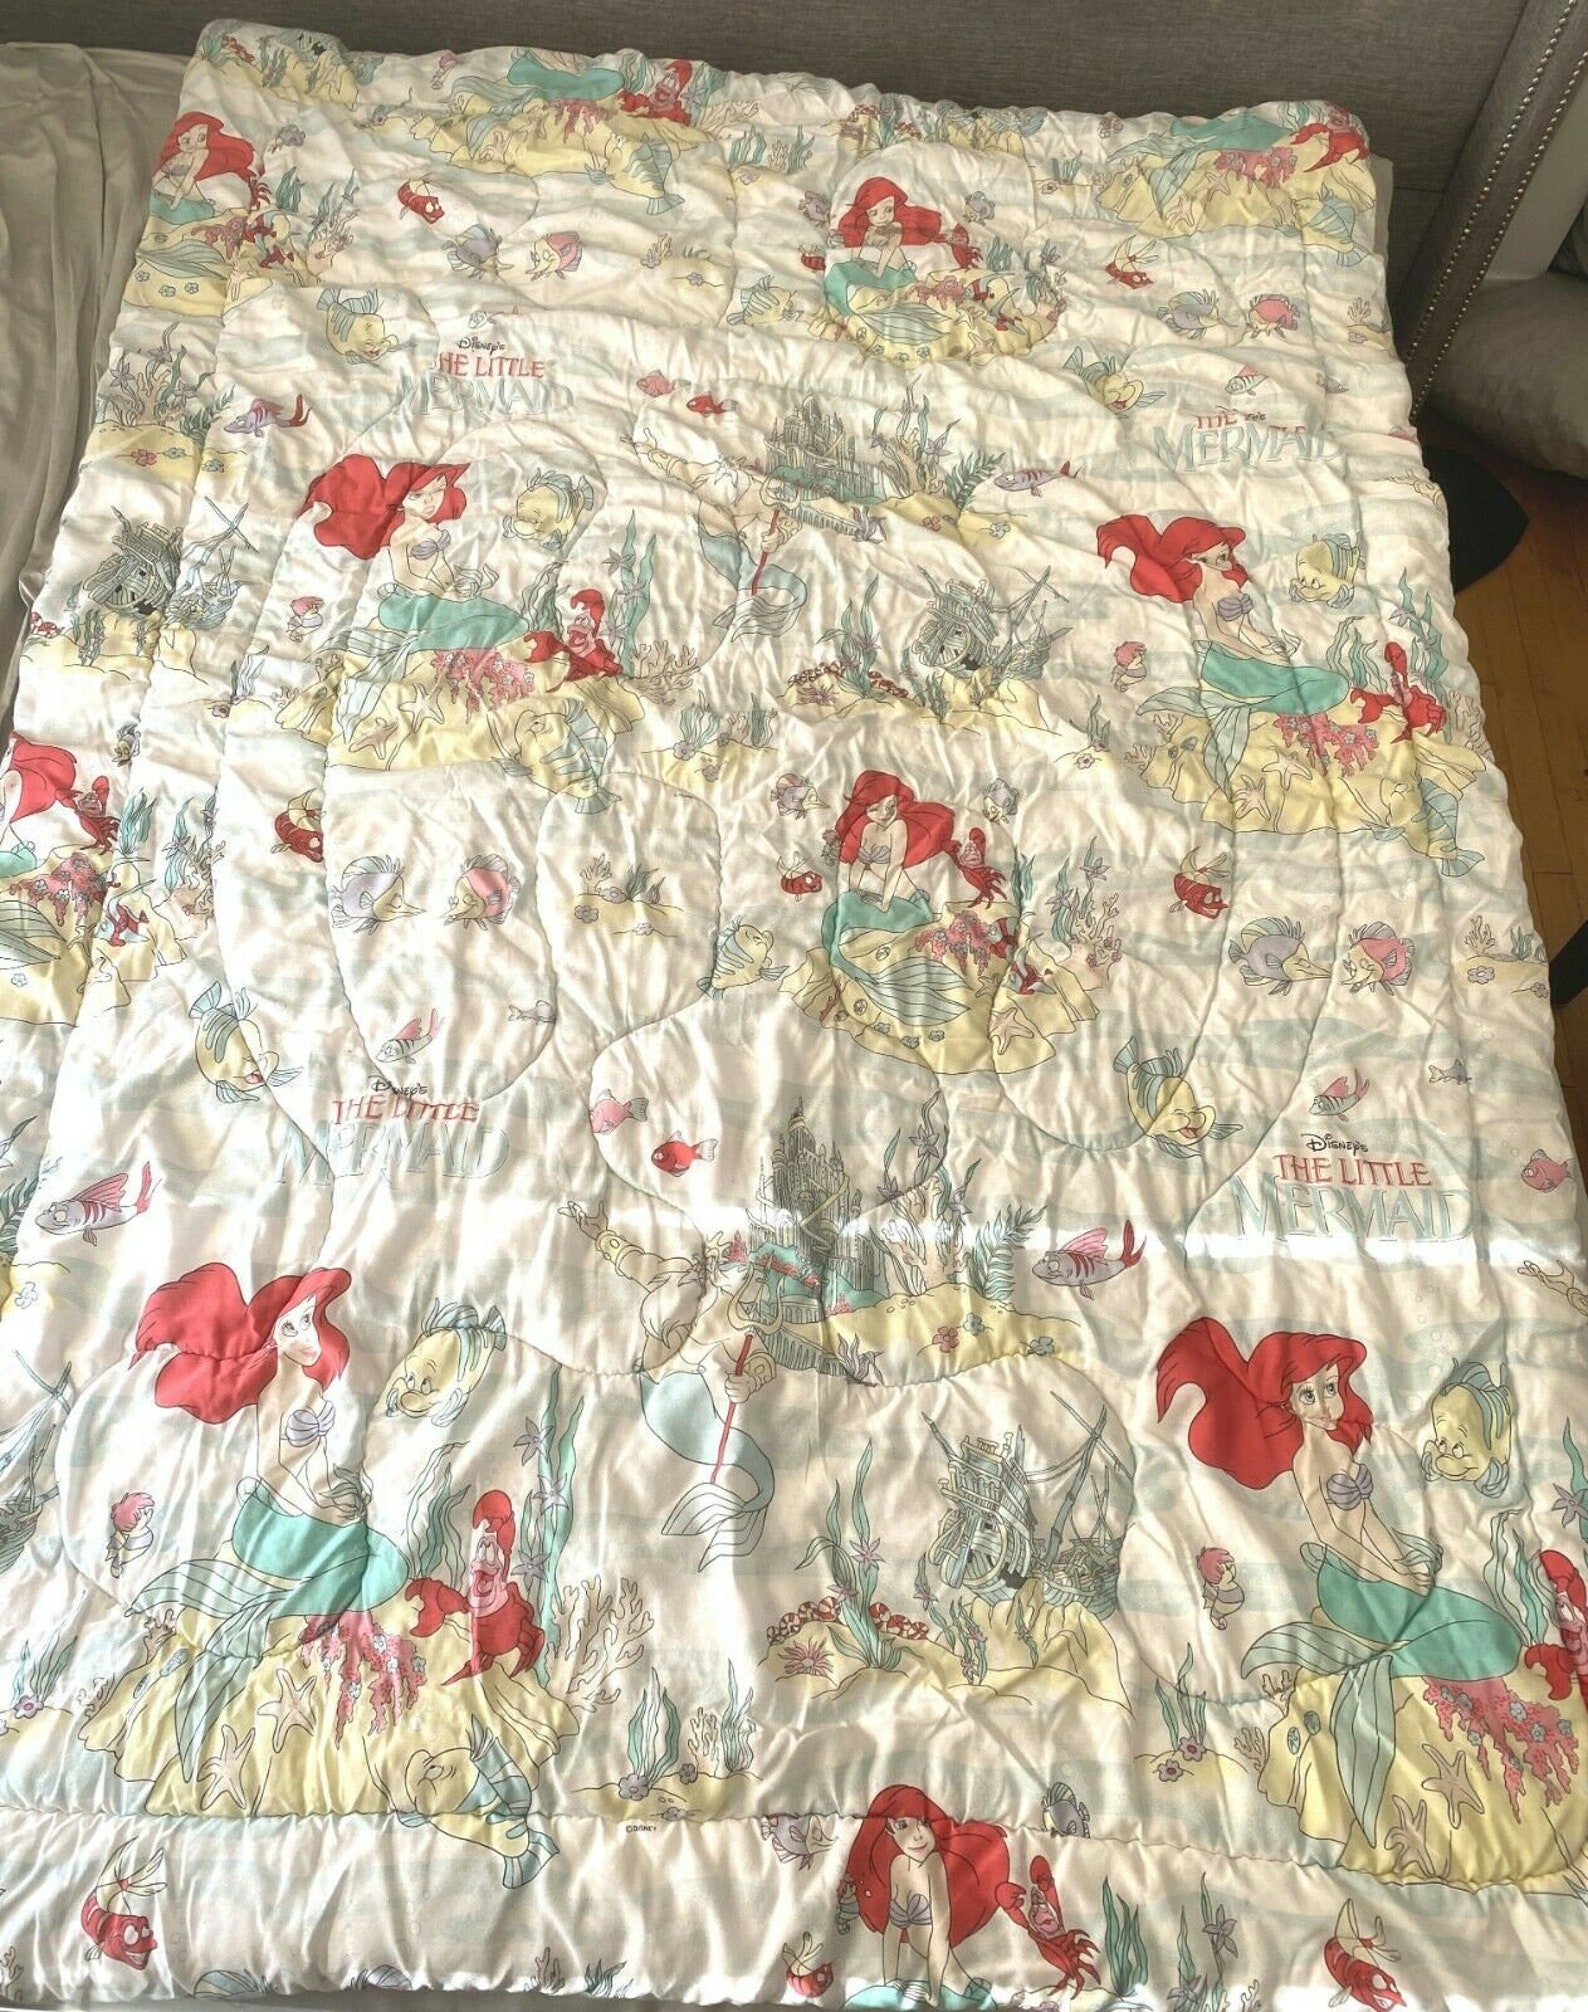 Vintage 90s The Little Mermaid Twin 6 Piece Bedding Set | Etsy